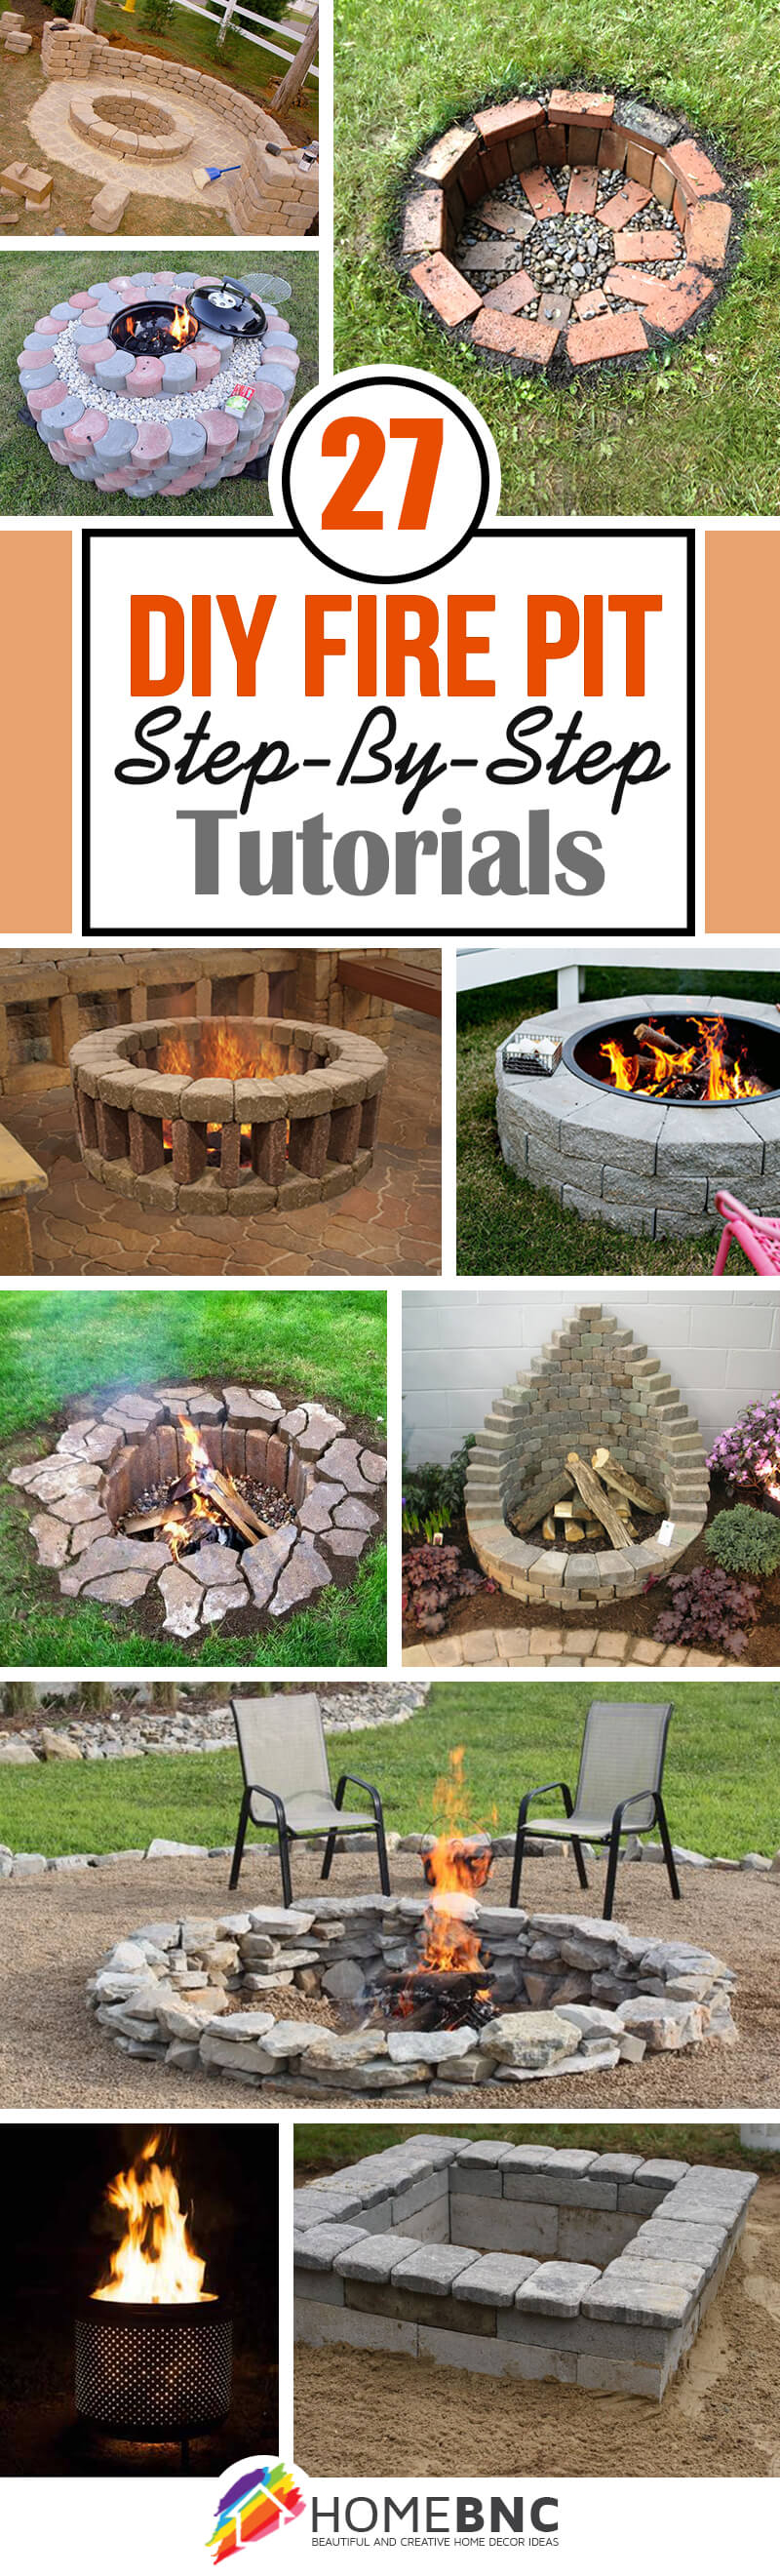 27 Best Diy Firepit Ideas And Designs, Small Fire Pit Backyard